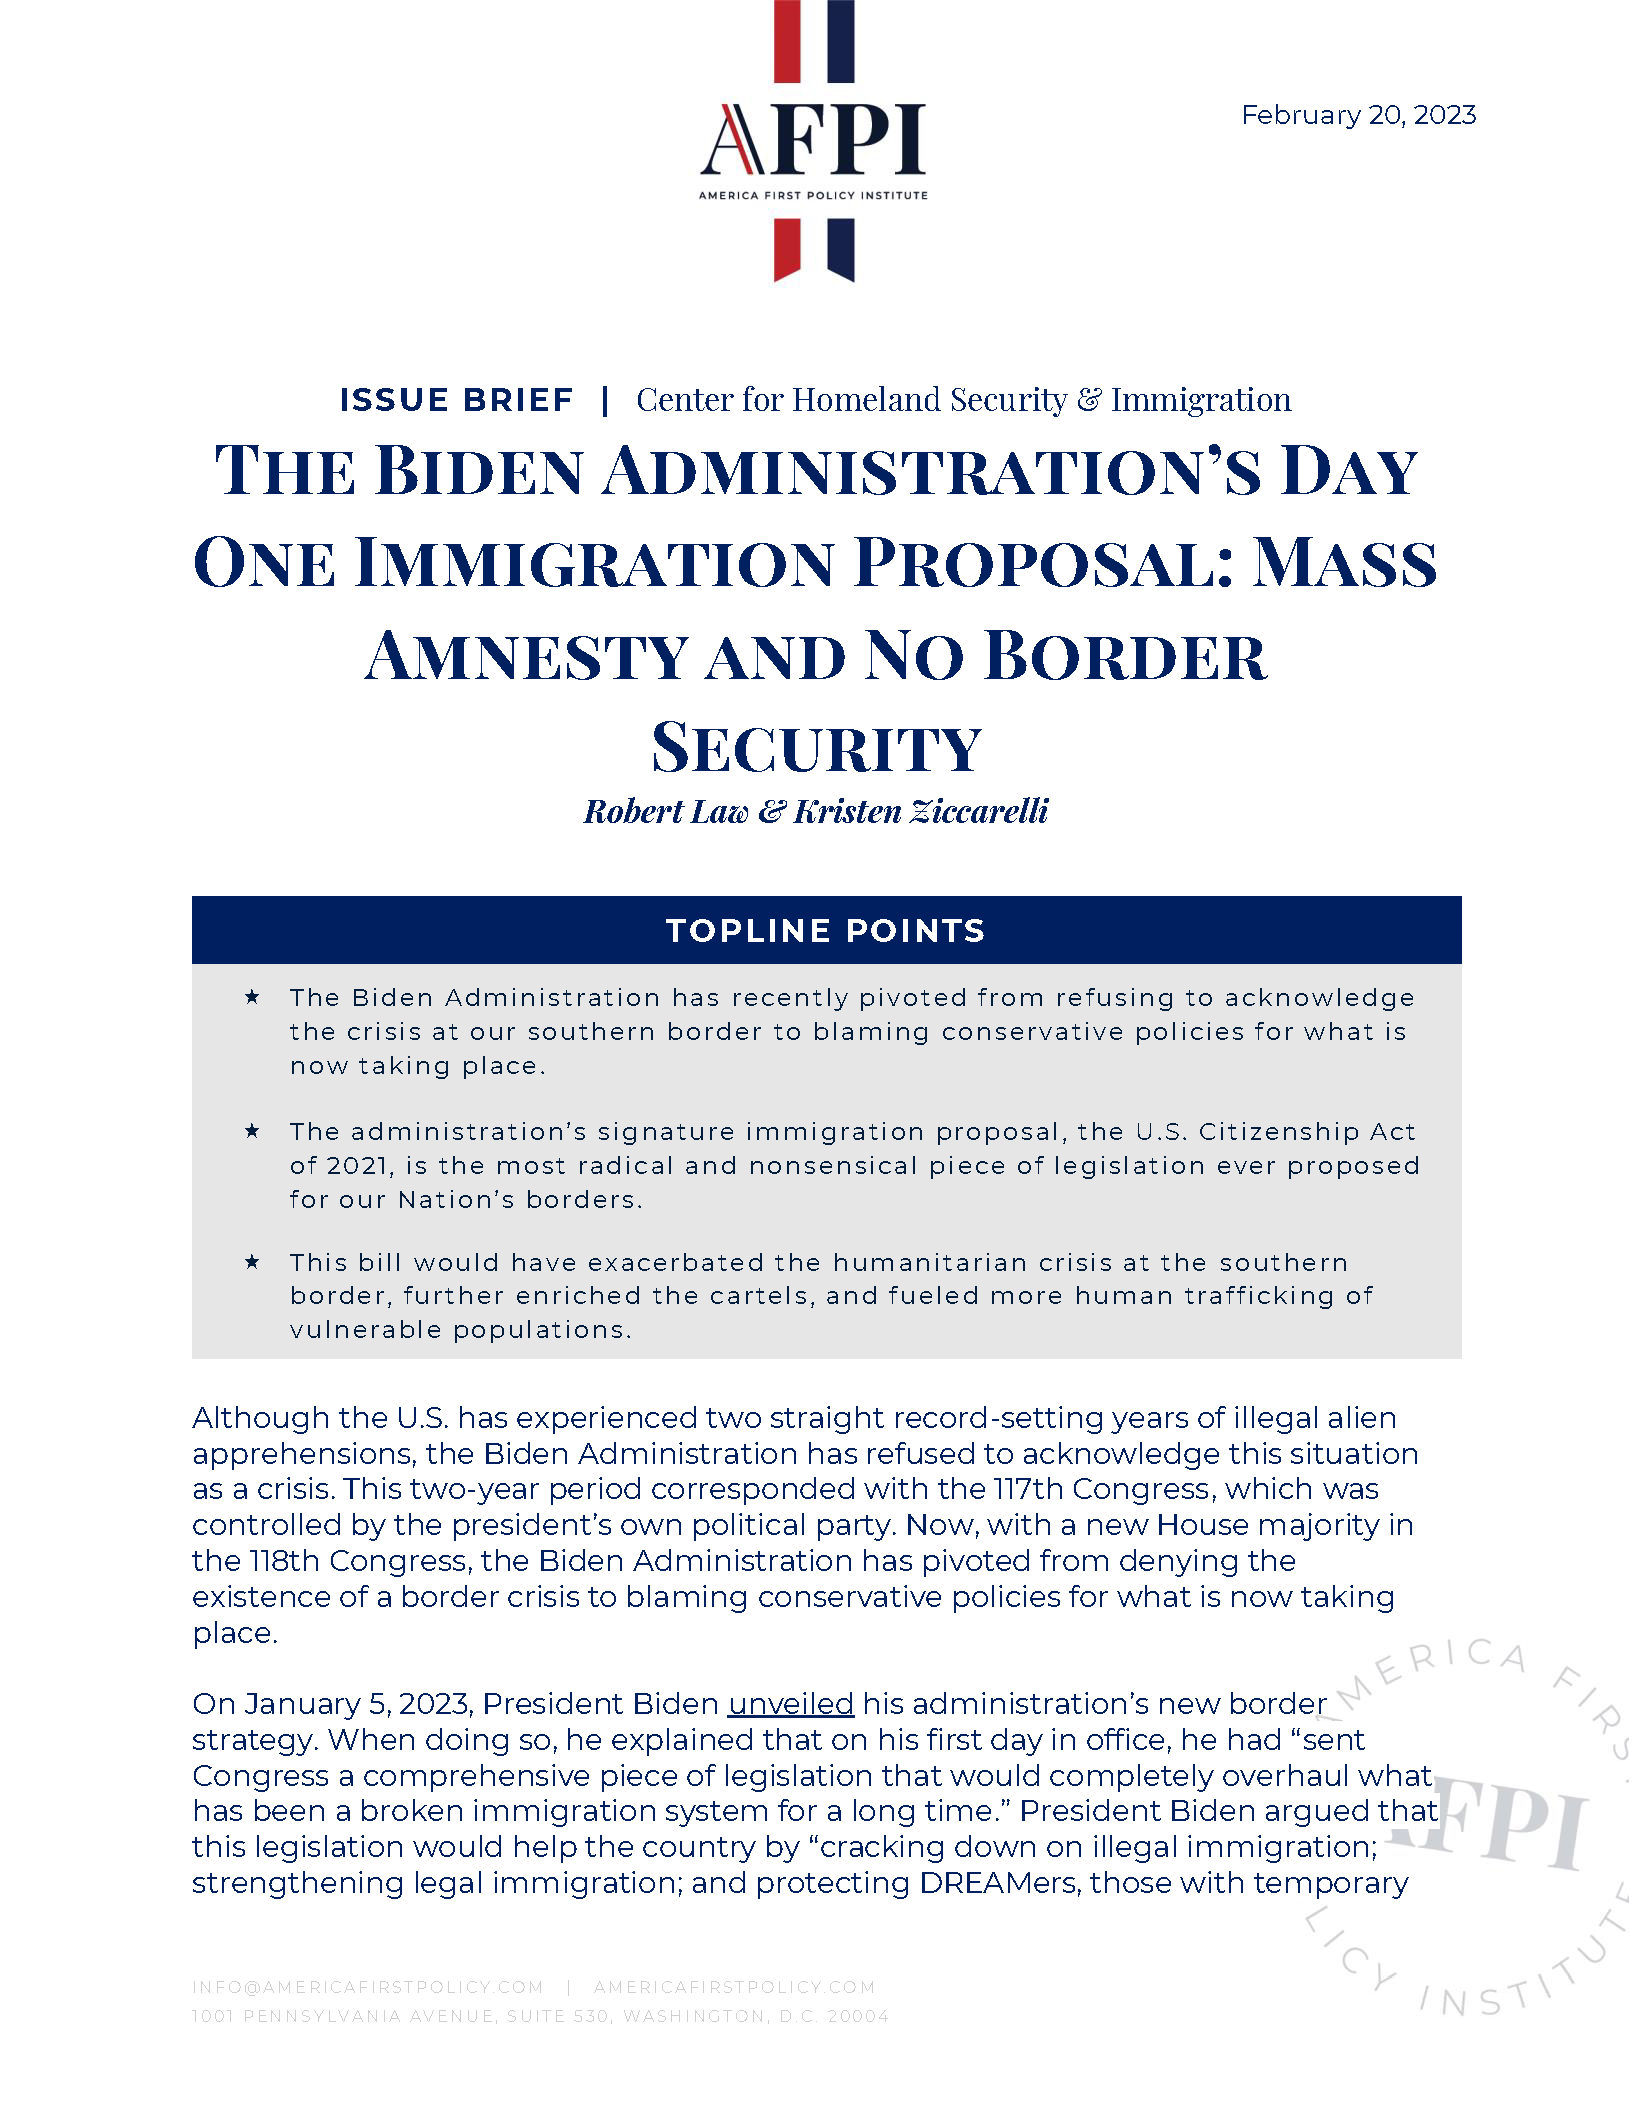 The Biden Administration’s Day One Immigration Proposal Mass Amnesty